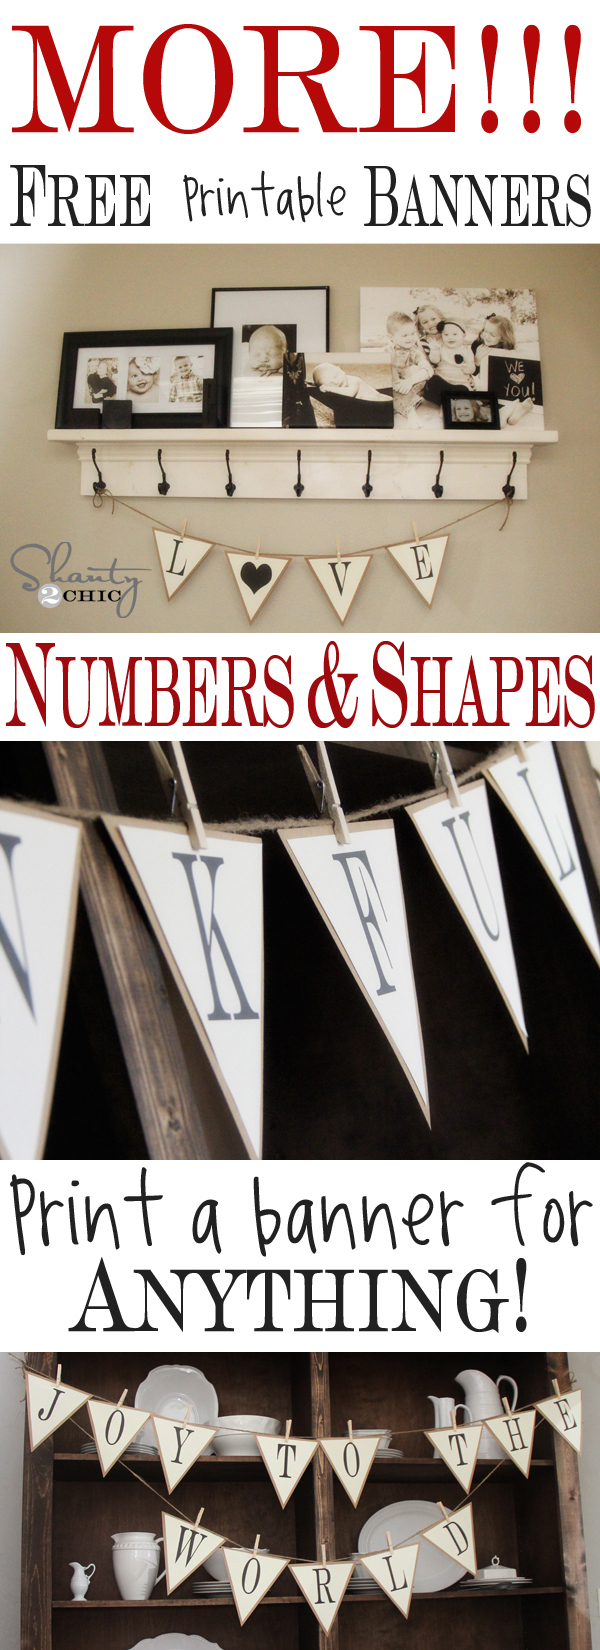 More Free Printable Banners ~ Numbers &amp;amp; Shapes!!! - Shanty 2 Chic - Free Printable Banner Maker